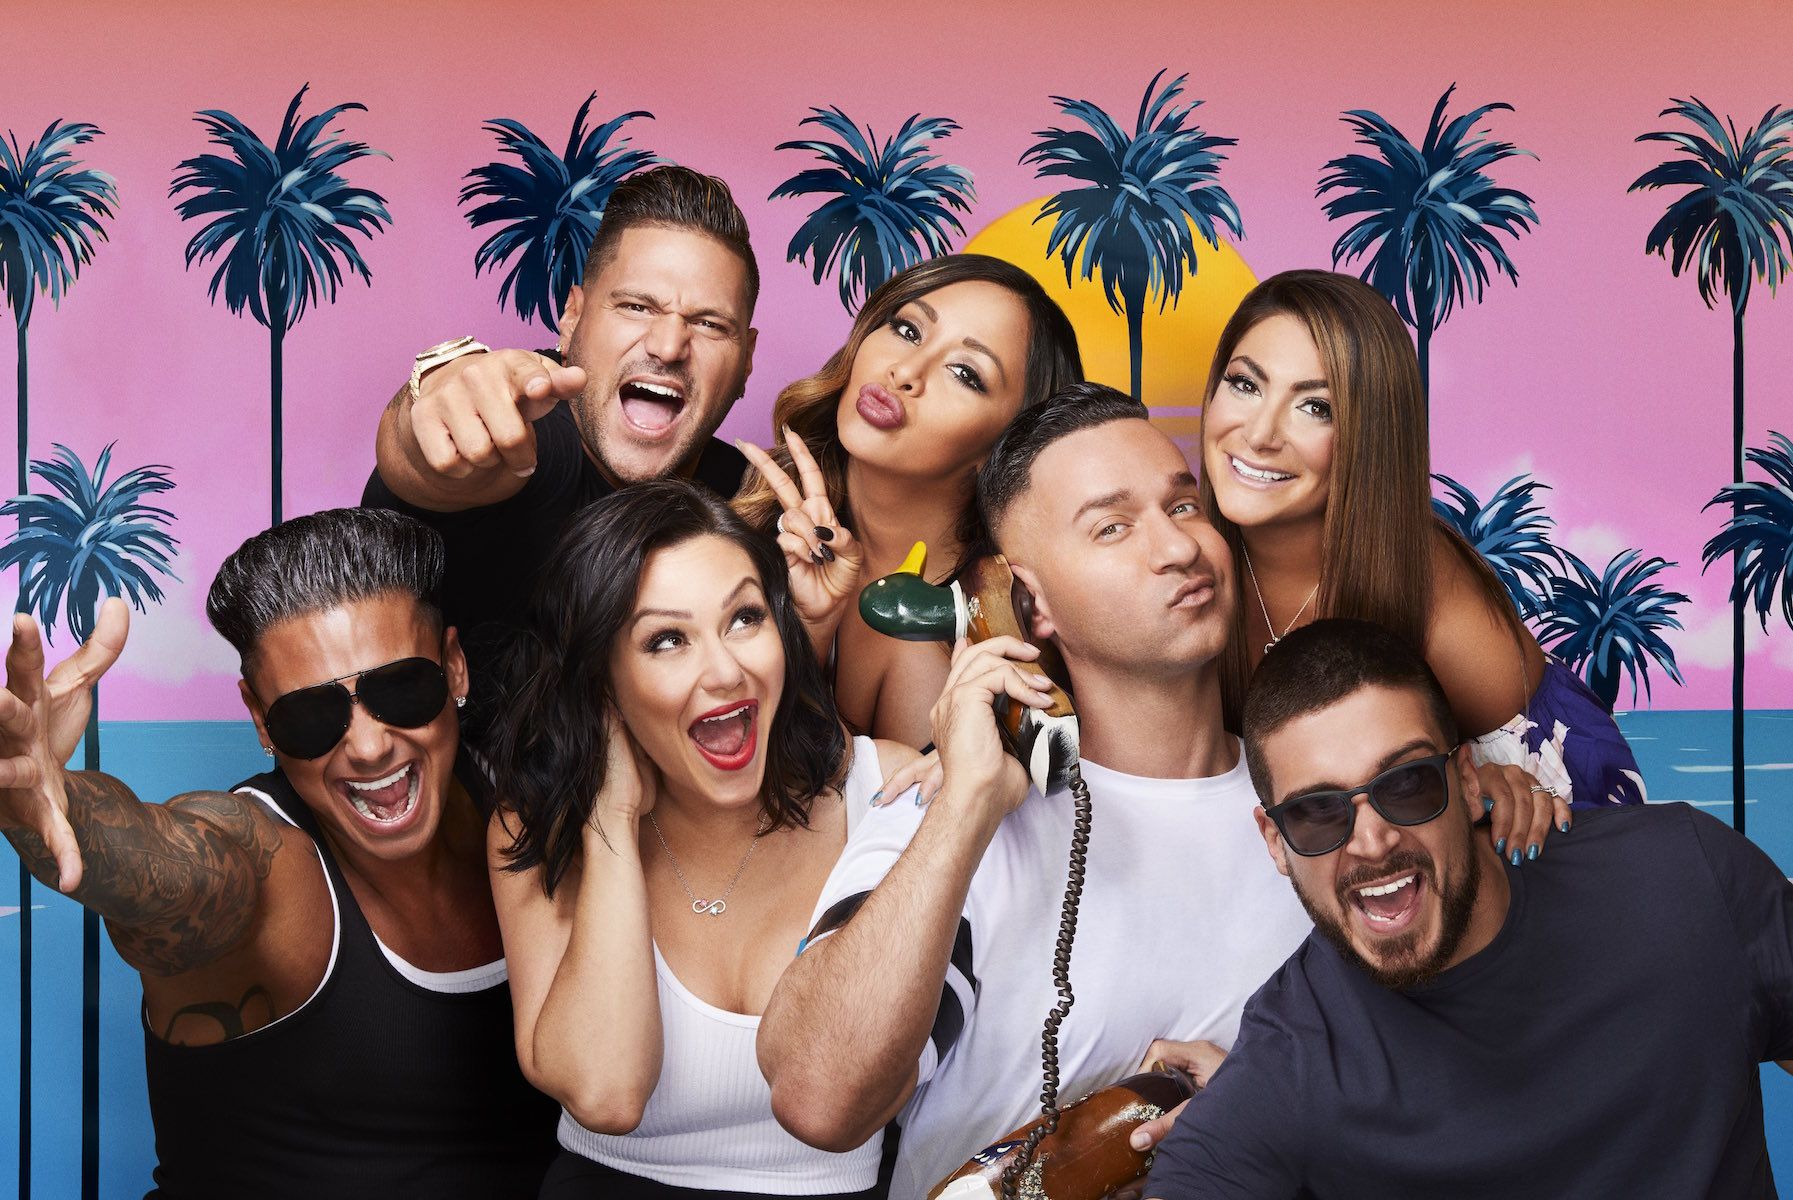 Who Needs Hoboken? Snooki and JWoww's Jersey Shore Spinoff Finds a